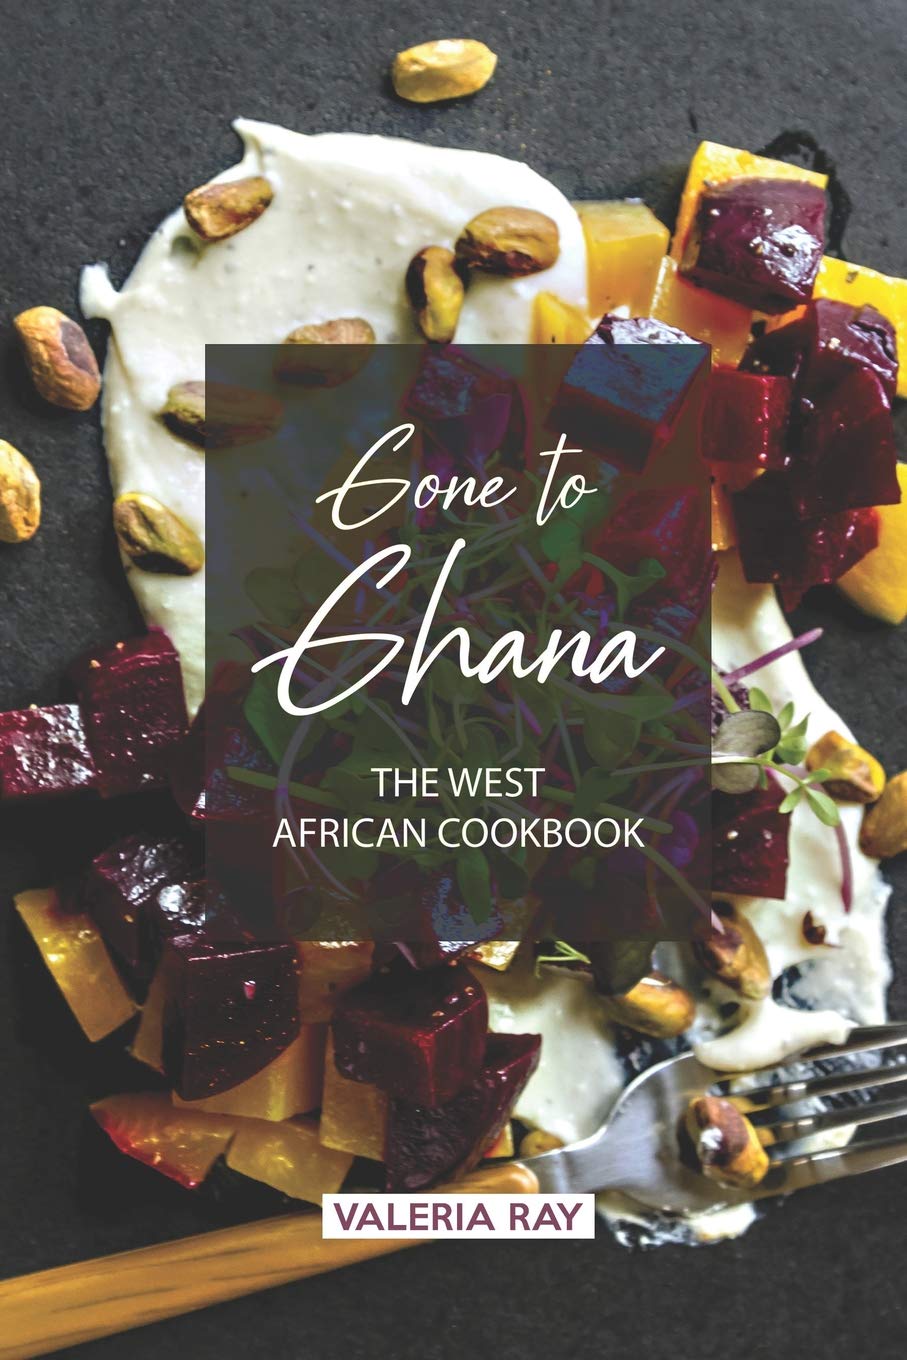 Gone to Ghana: The West African Cookbook (Valeria Ray)